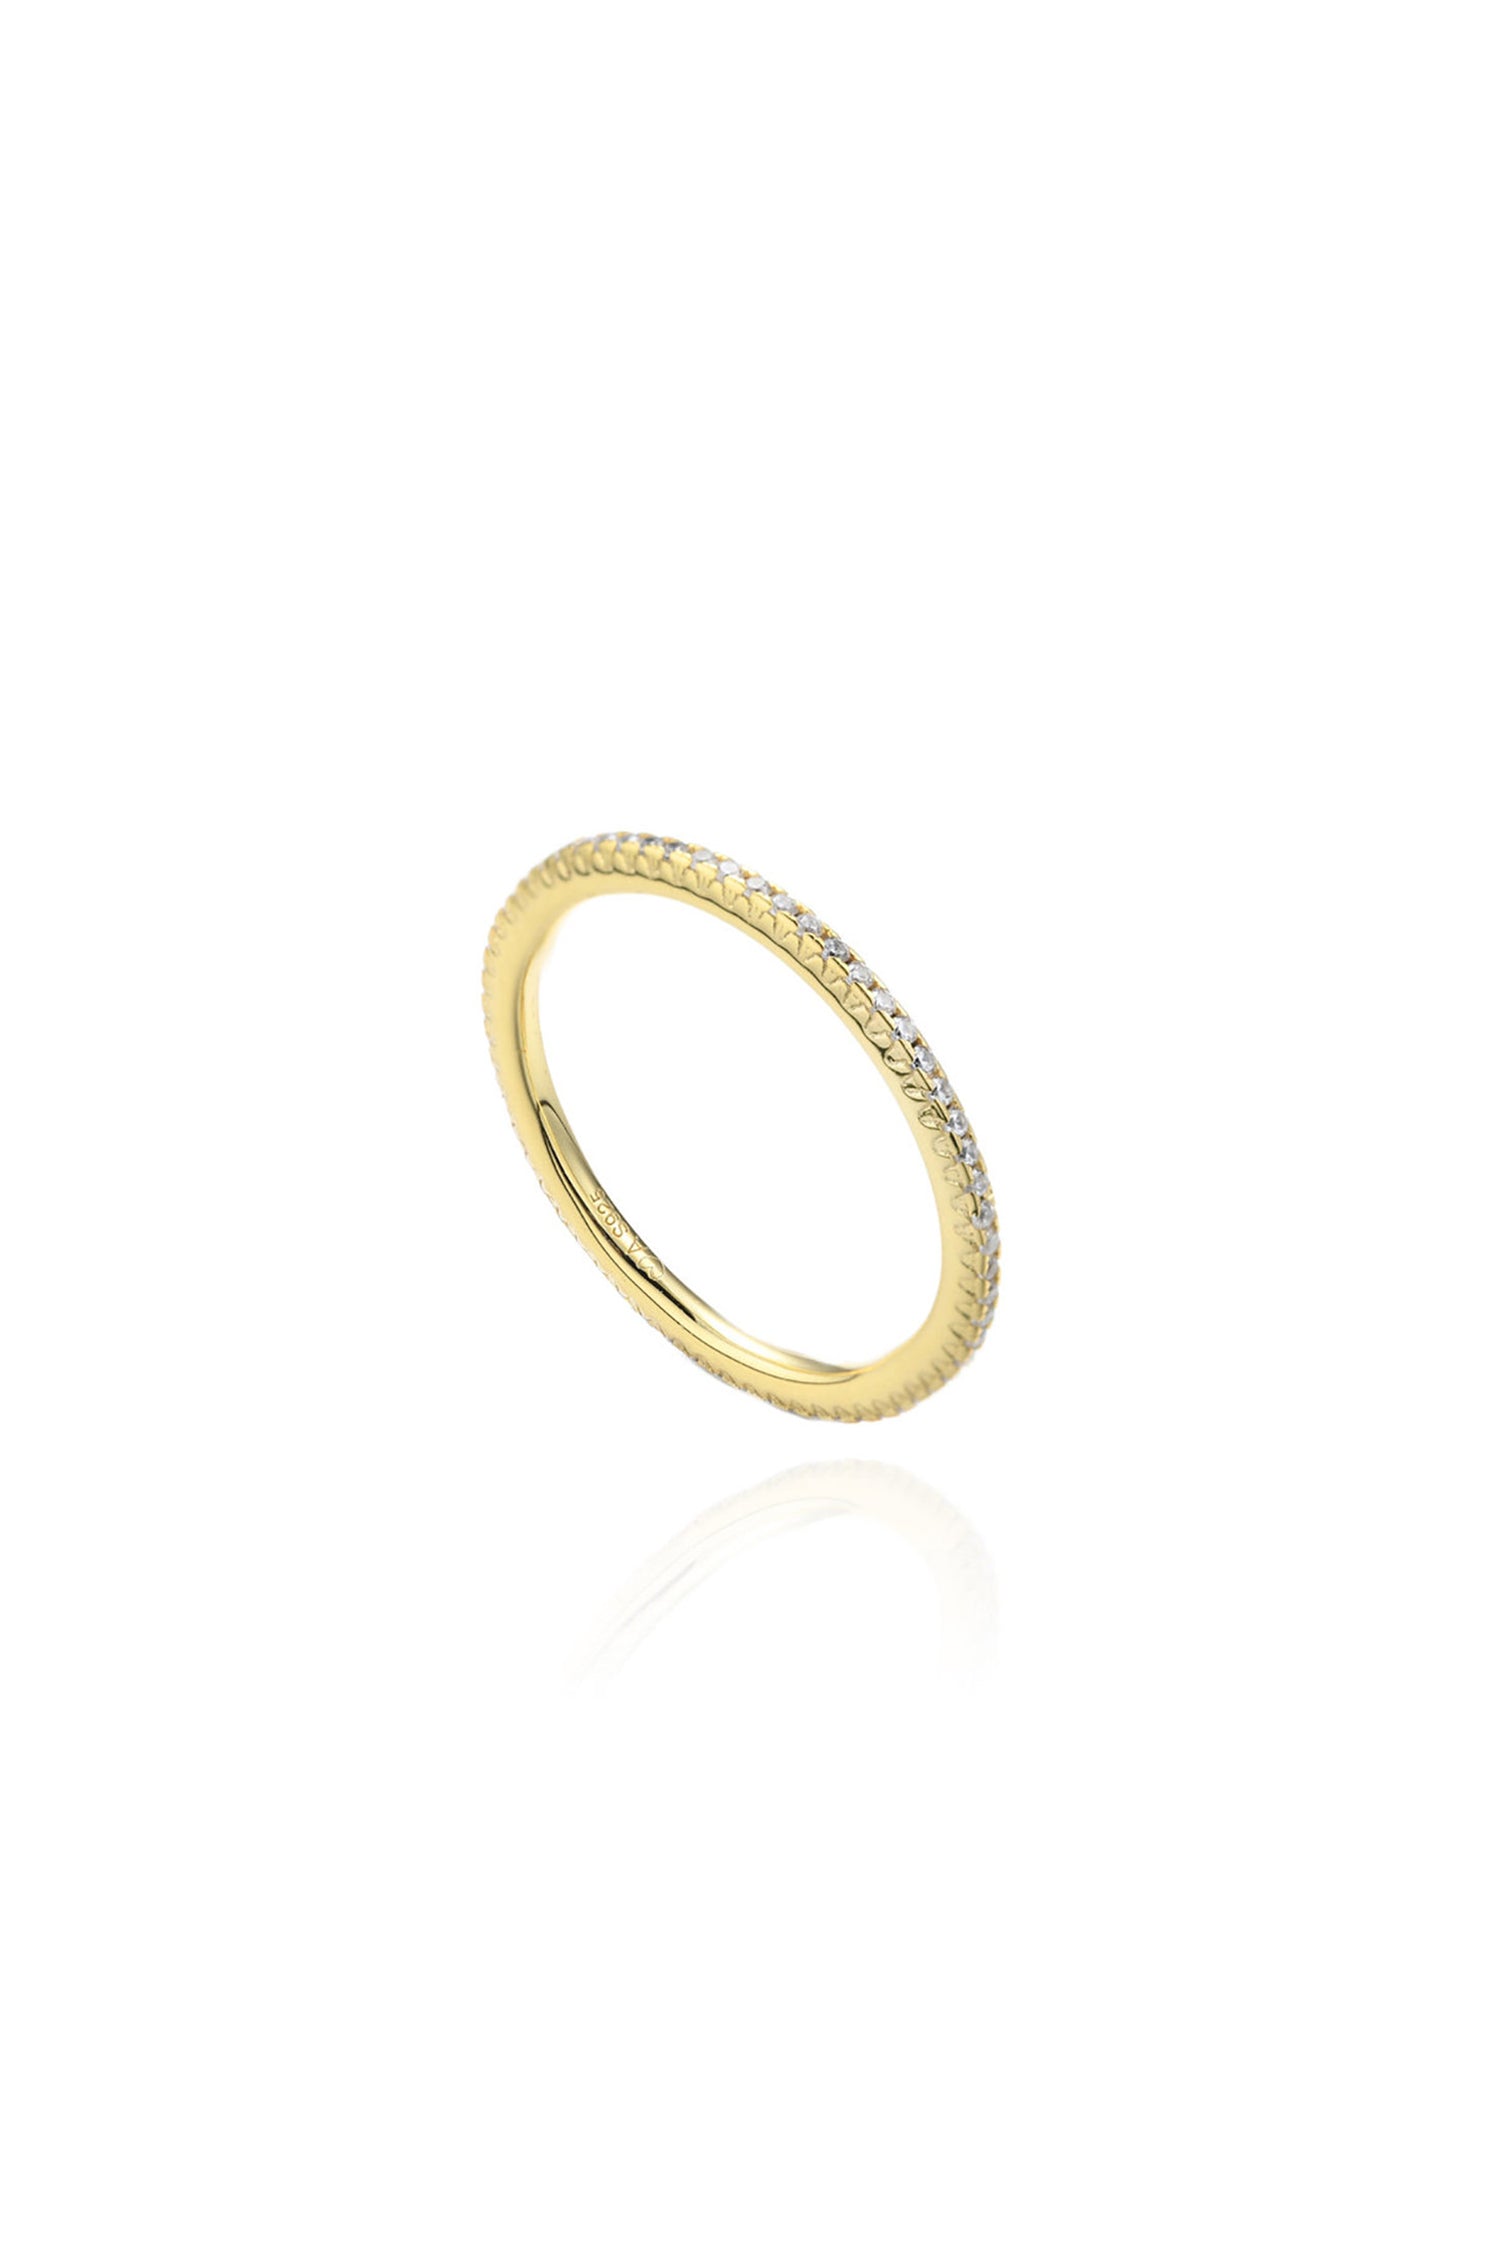  Eternity Pave Ring 14k Gold Plated Sterling Silver White Background